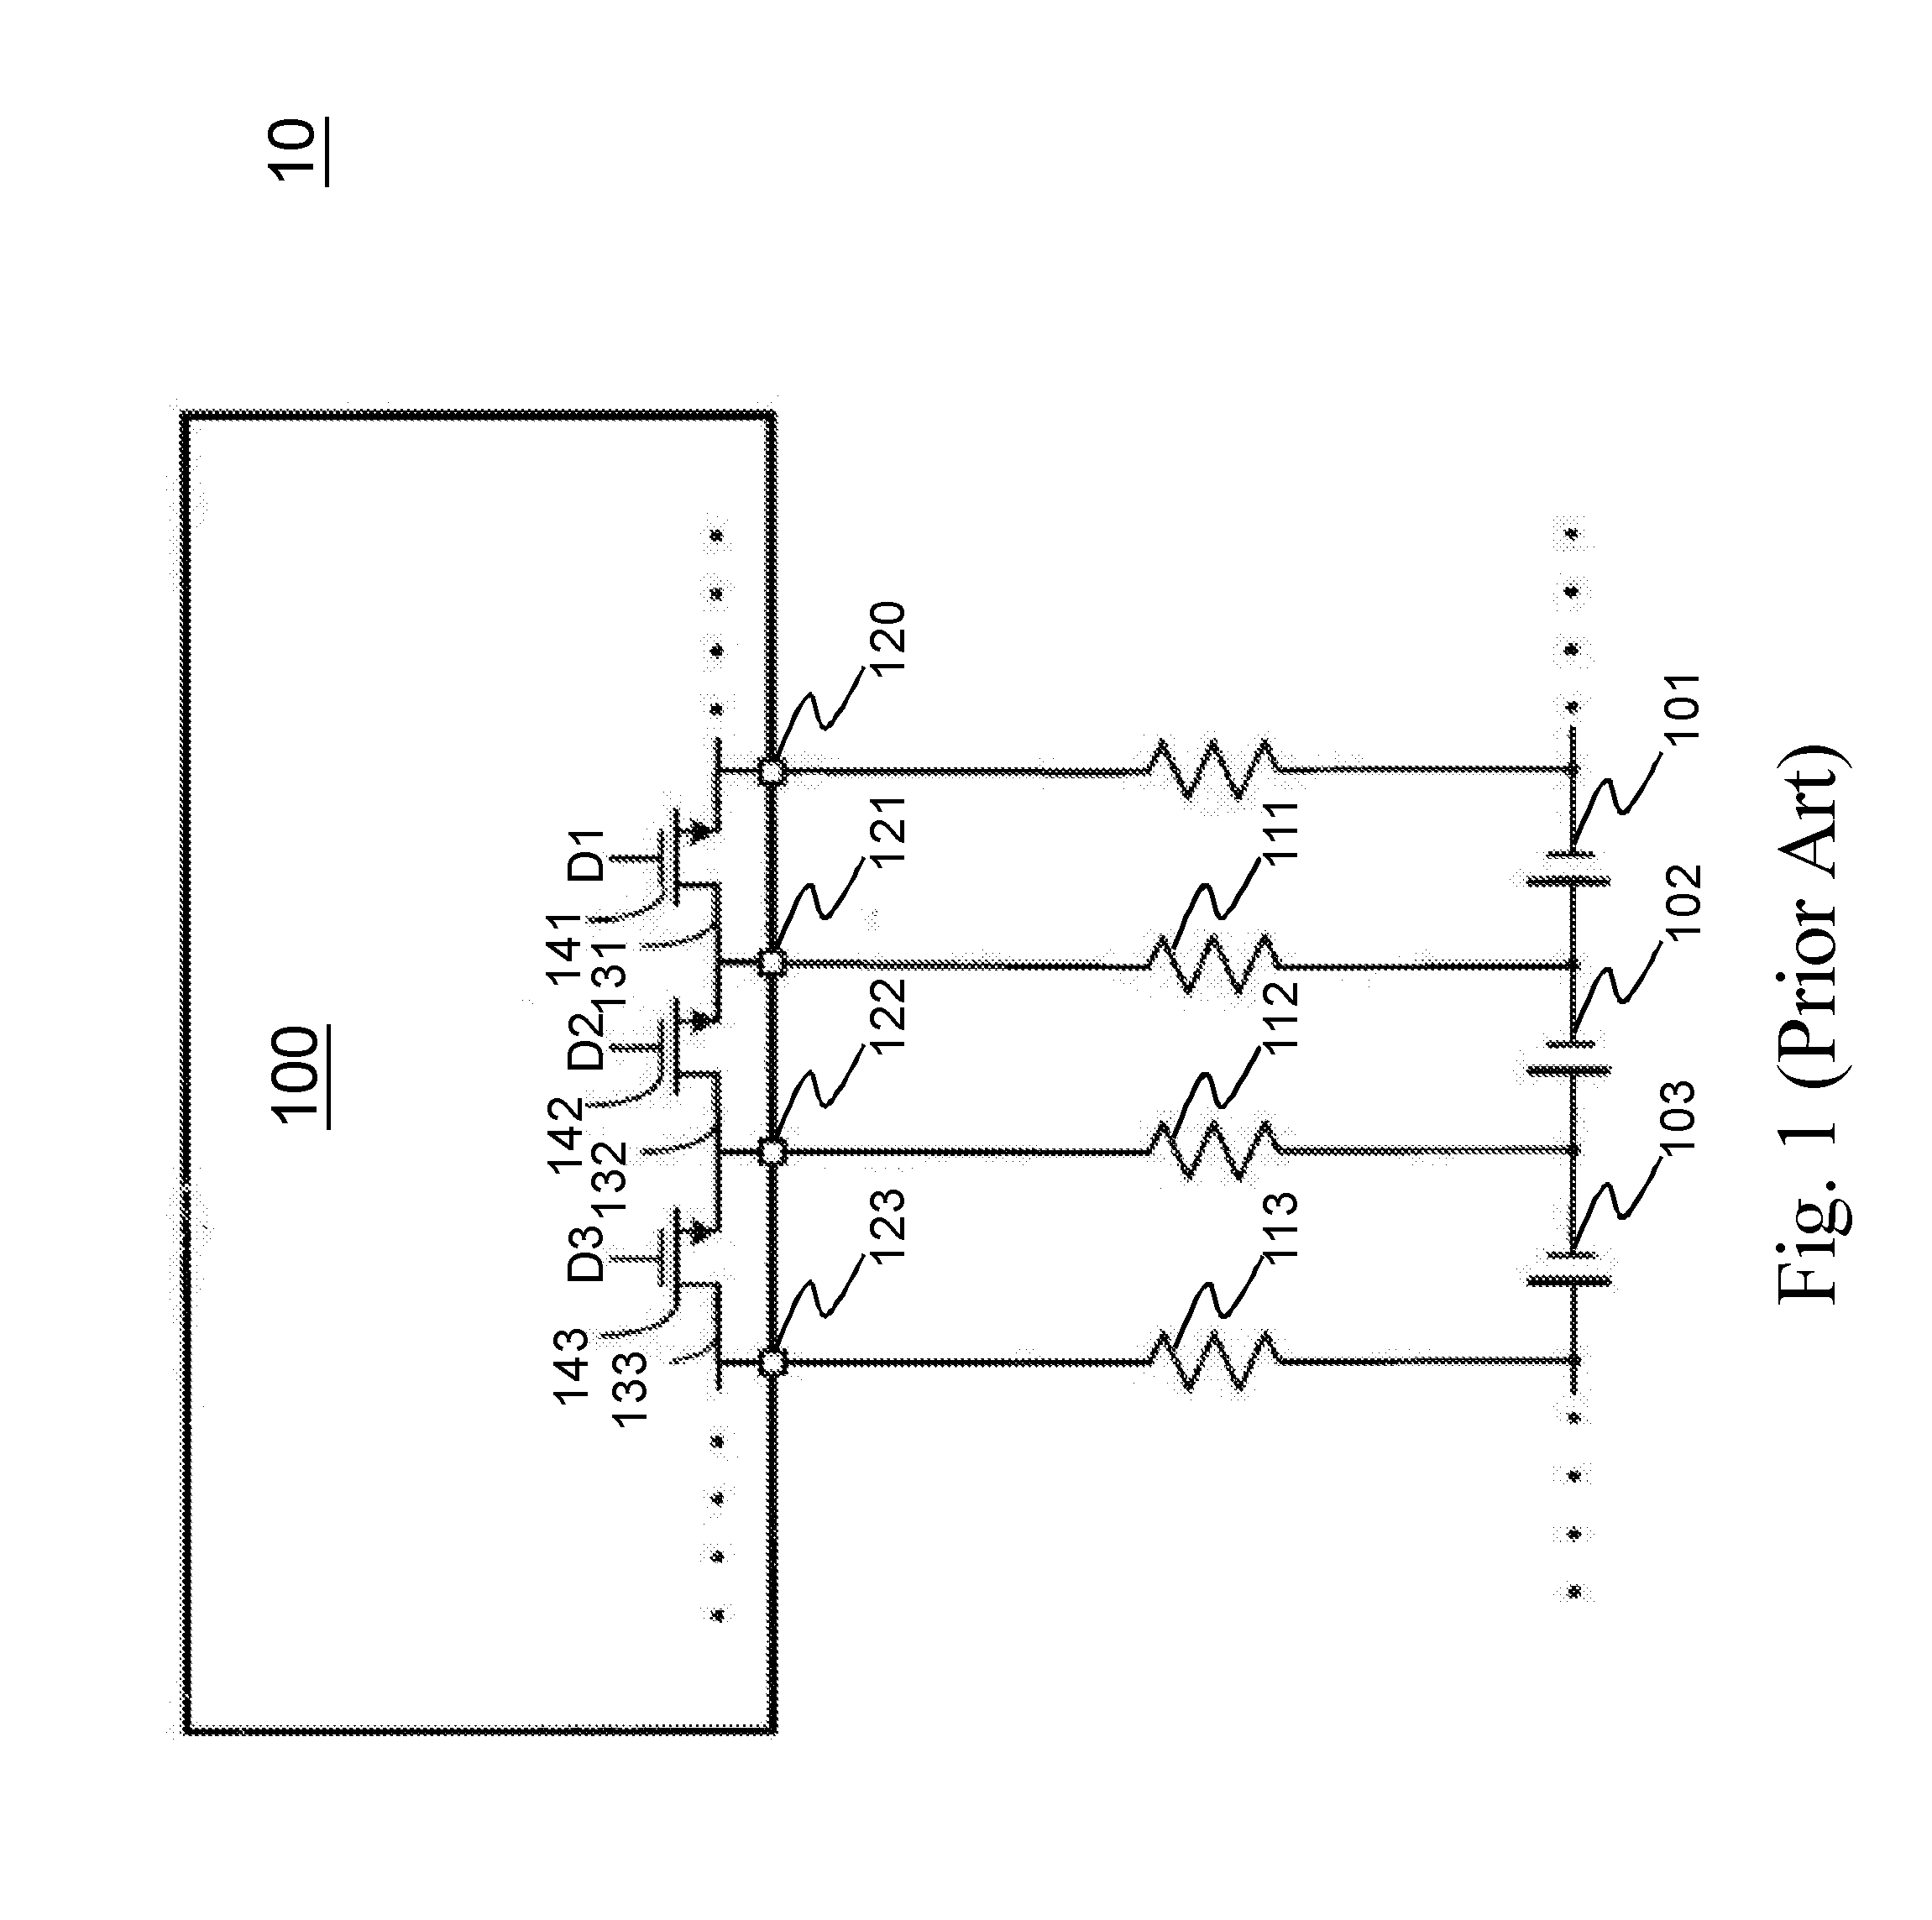 Power transfer circuit for achieving power transfer between stacked rechargeable battery cells